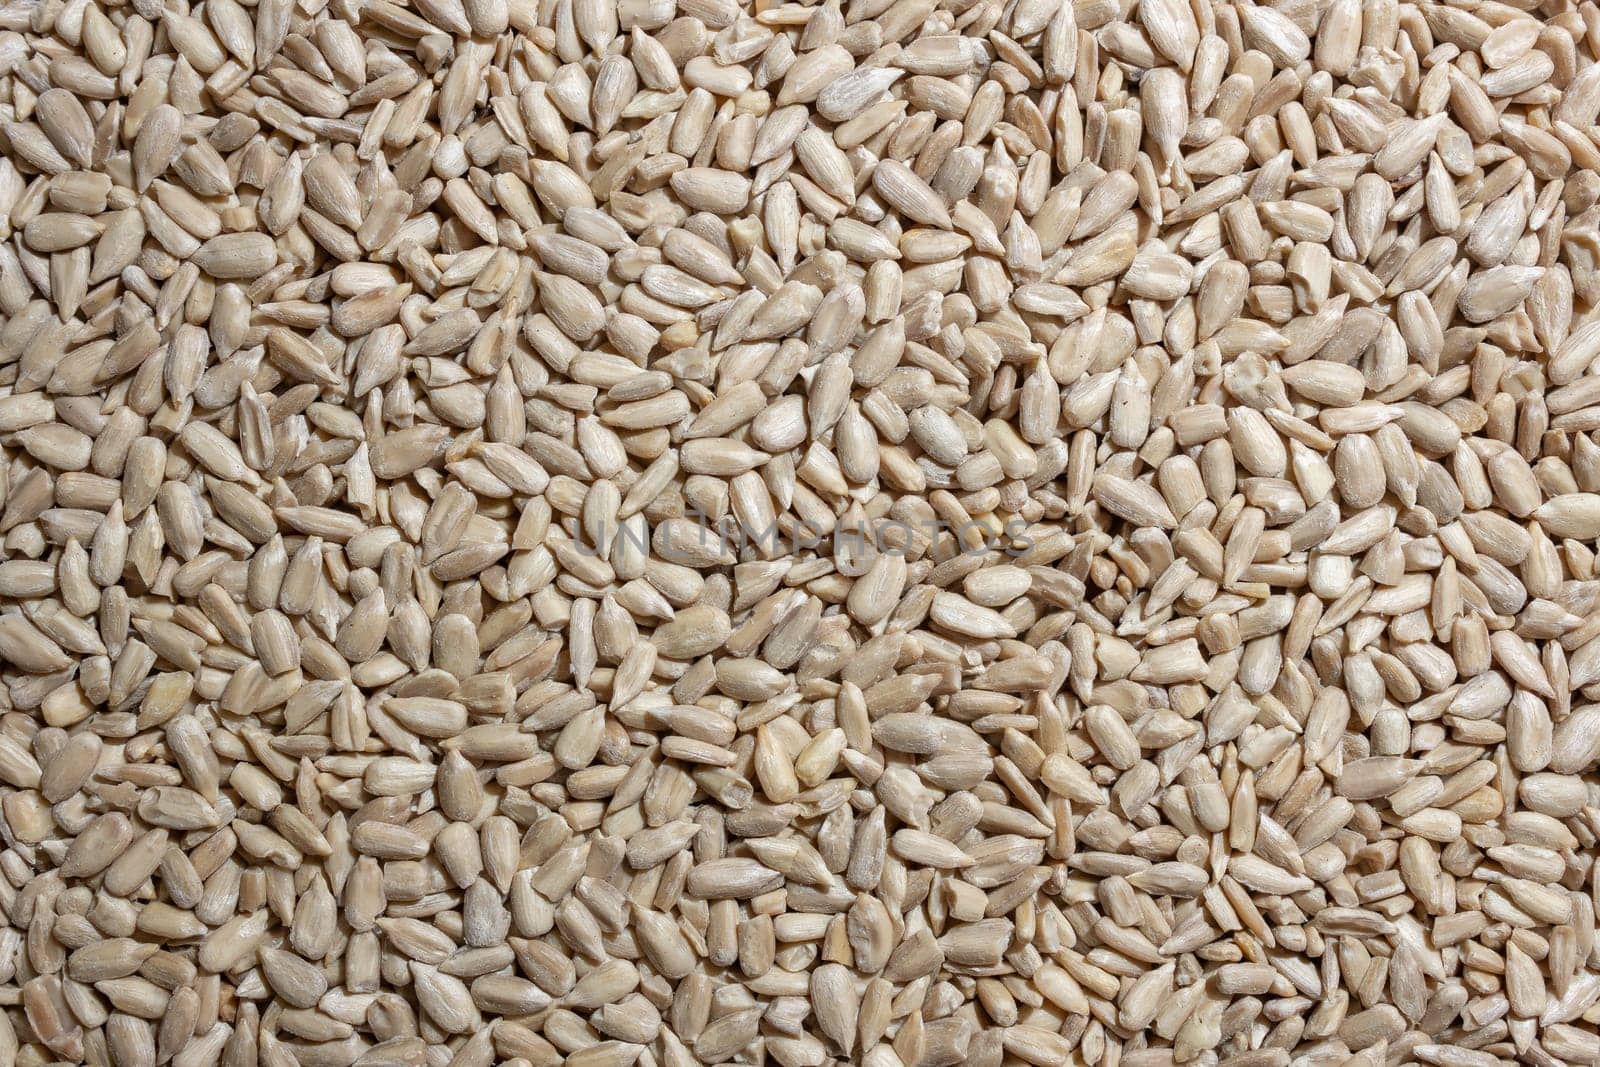 Peeled Sunflower Seeds Background: A Culinary Canvas of Shell-free Sunflower Seeds, Creating a Lively and Textured Background for Gourmet Cooking - Top View, Flat Lay